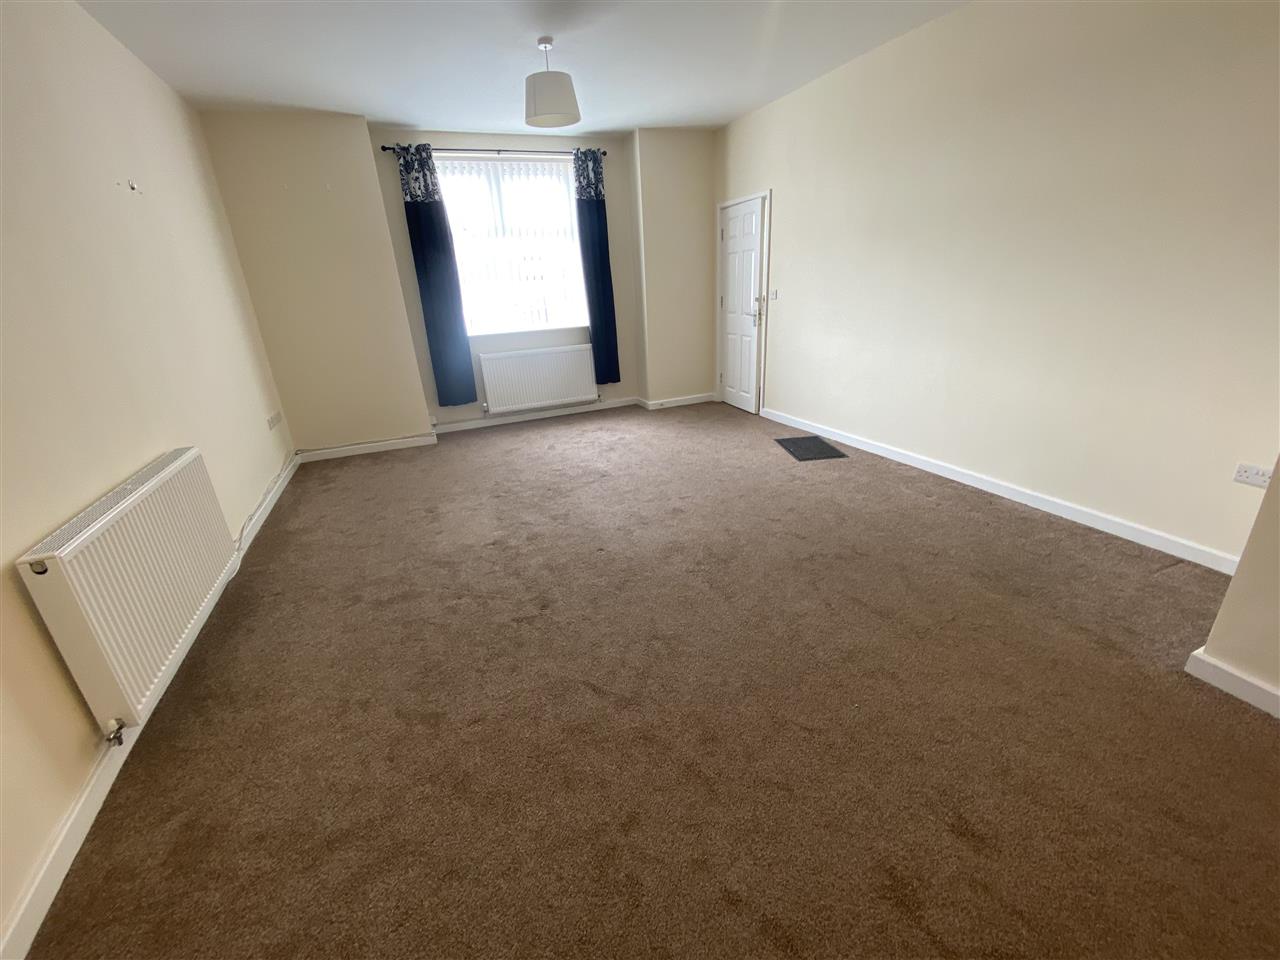 1 bed apartment to rent in Railway Road, Adlington, Chorley 3